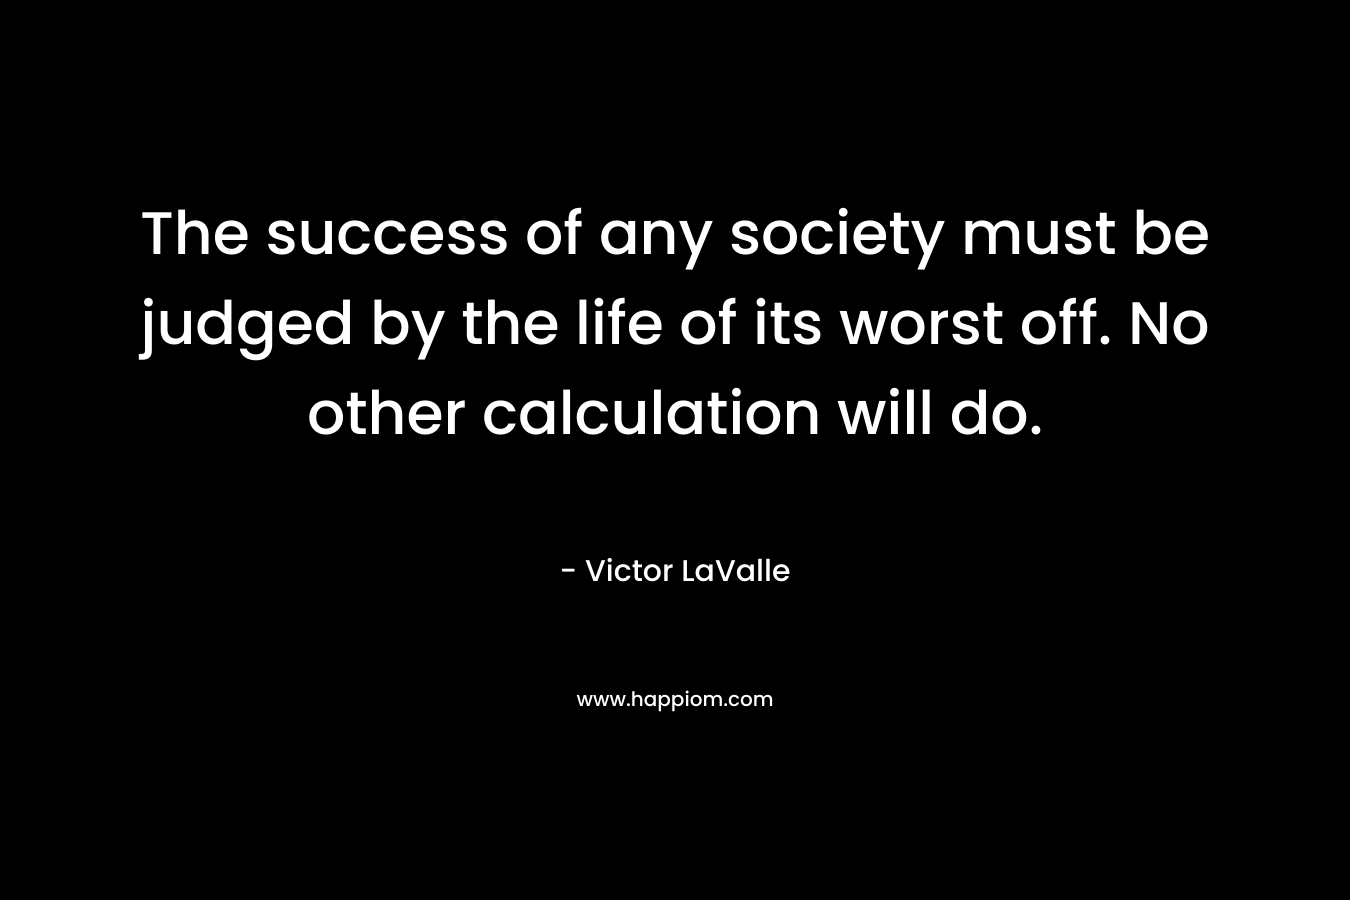 The success of any society must be judged by the life of its worst off. No other calculation will do.